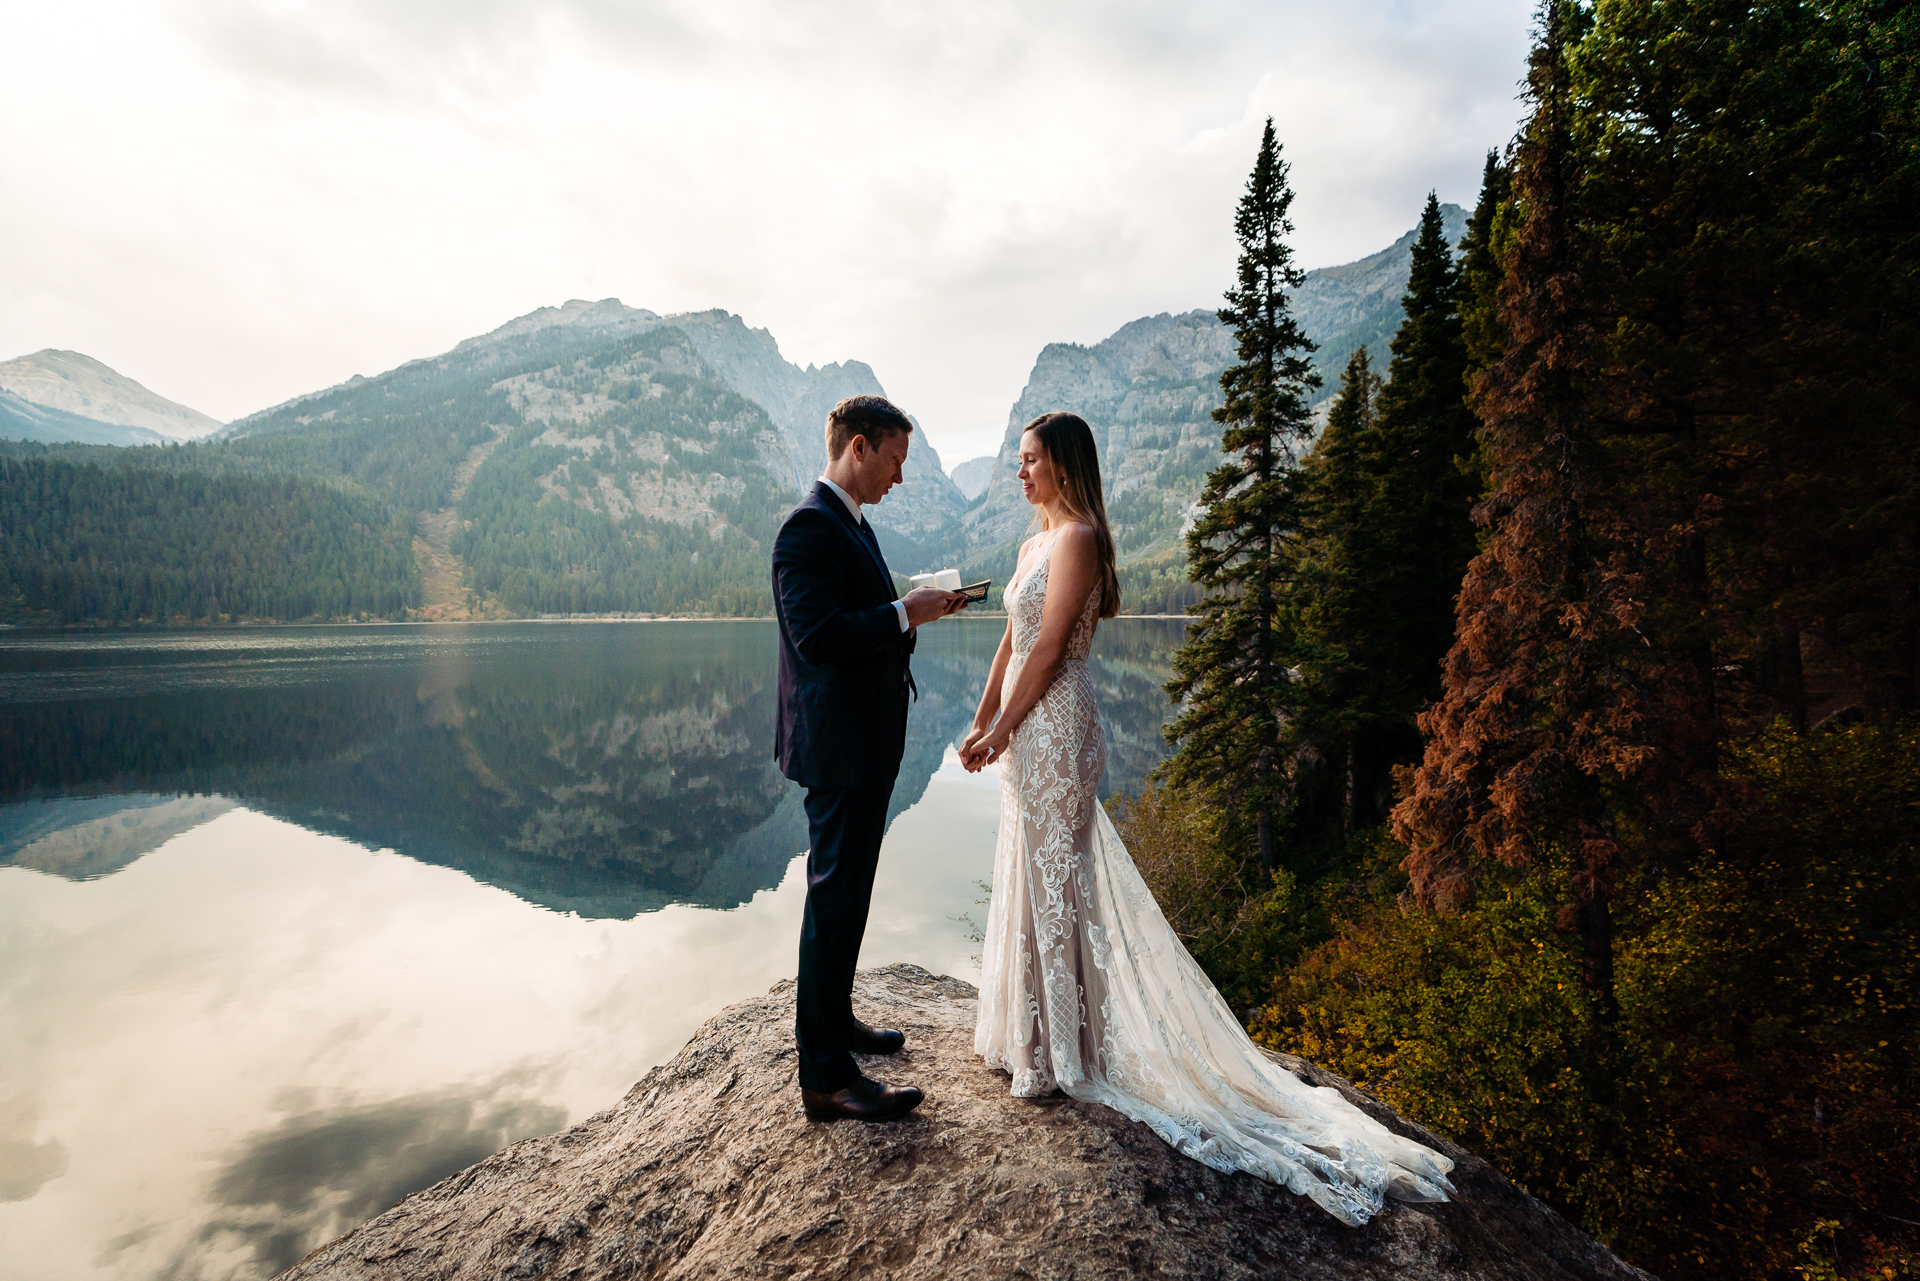 Elopement Ceremony taking place in Grand Teton National Park